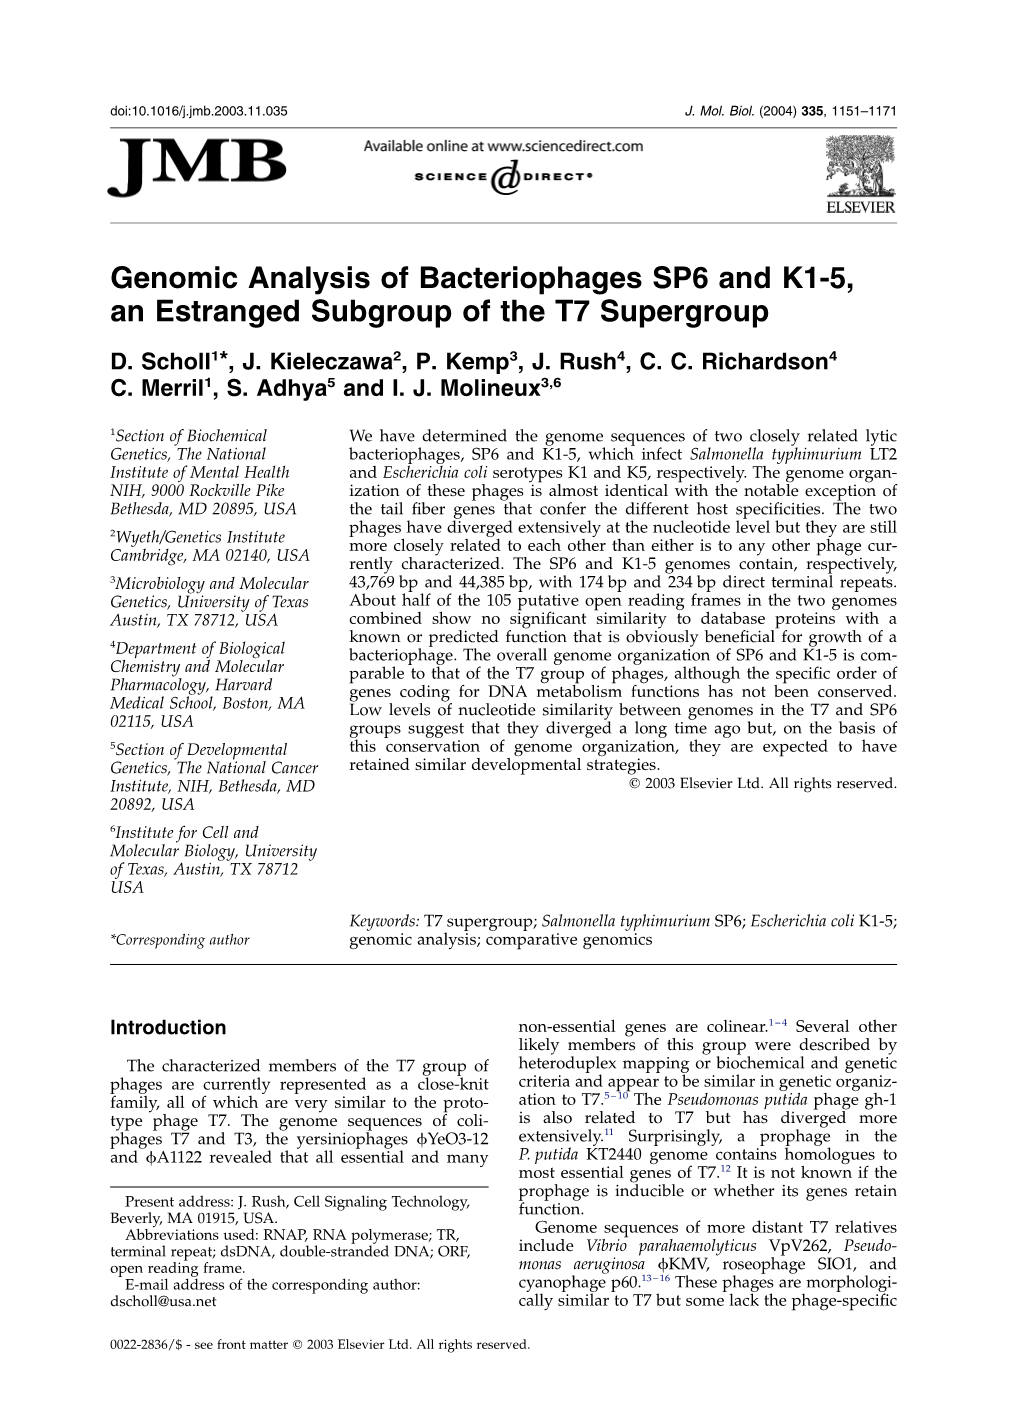 Genomic Analysis of Bacteriophages SP6 and K1-5, an Estranged Subgroup of the T7 Supergroup